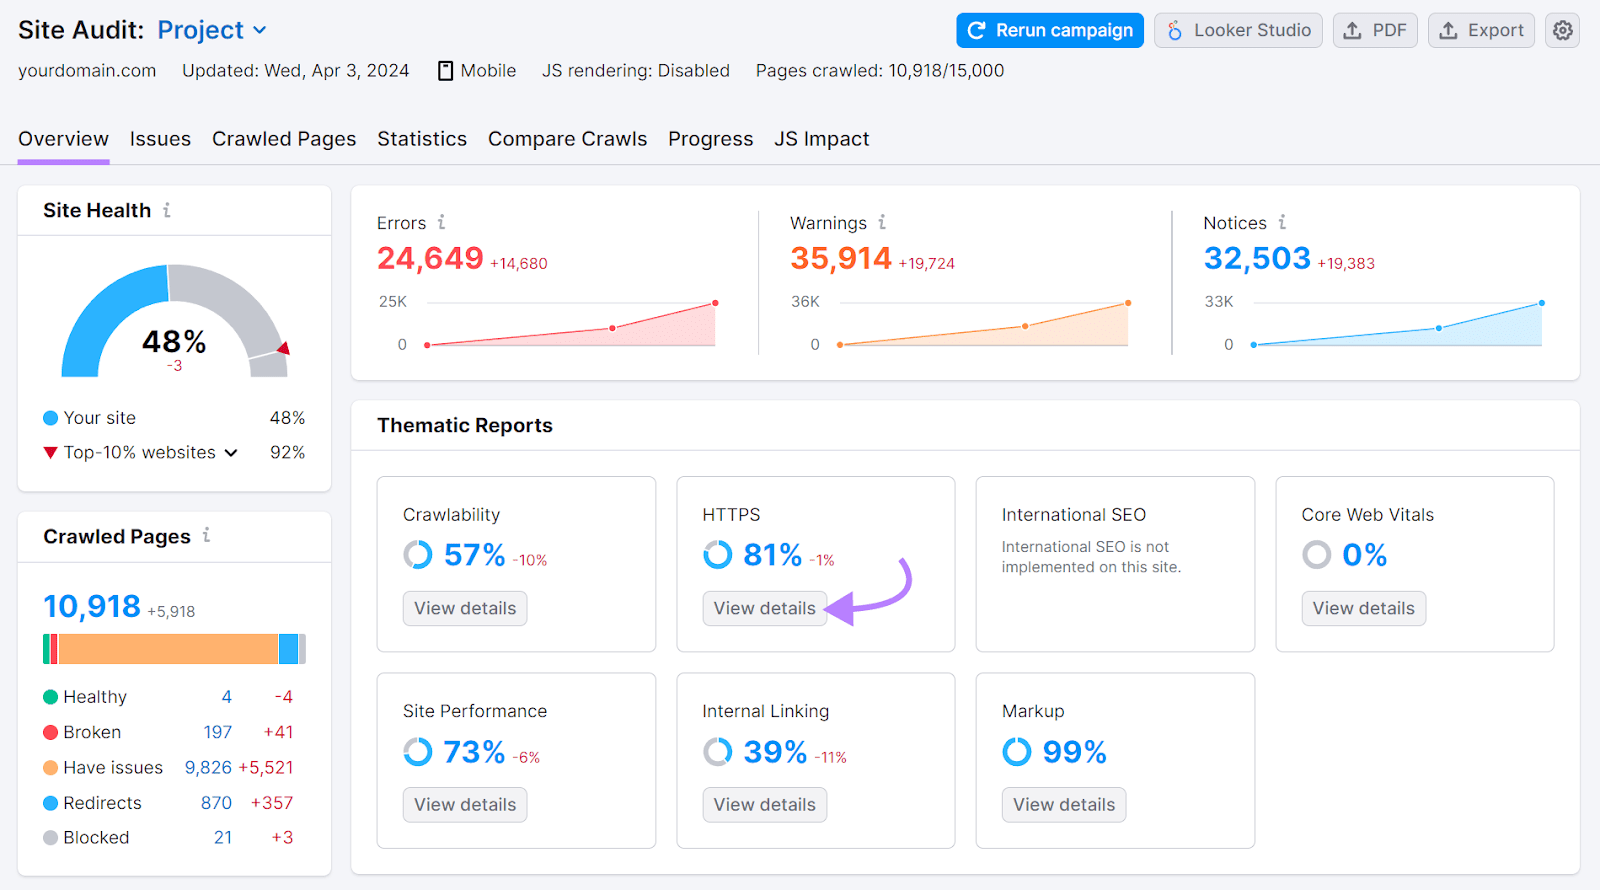 HTTPS implementation widget showing 81% in Site Audit's overview dashboard